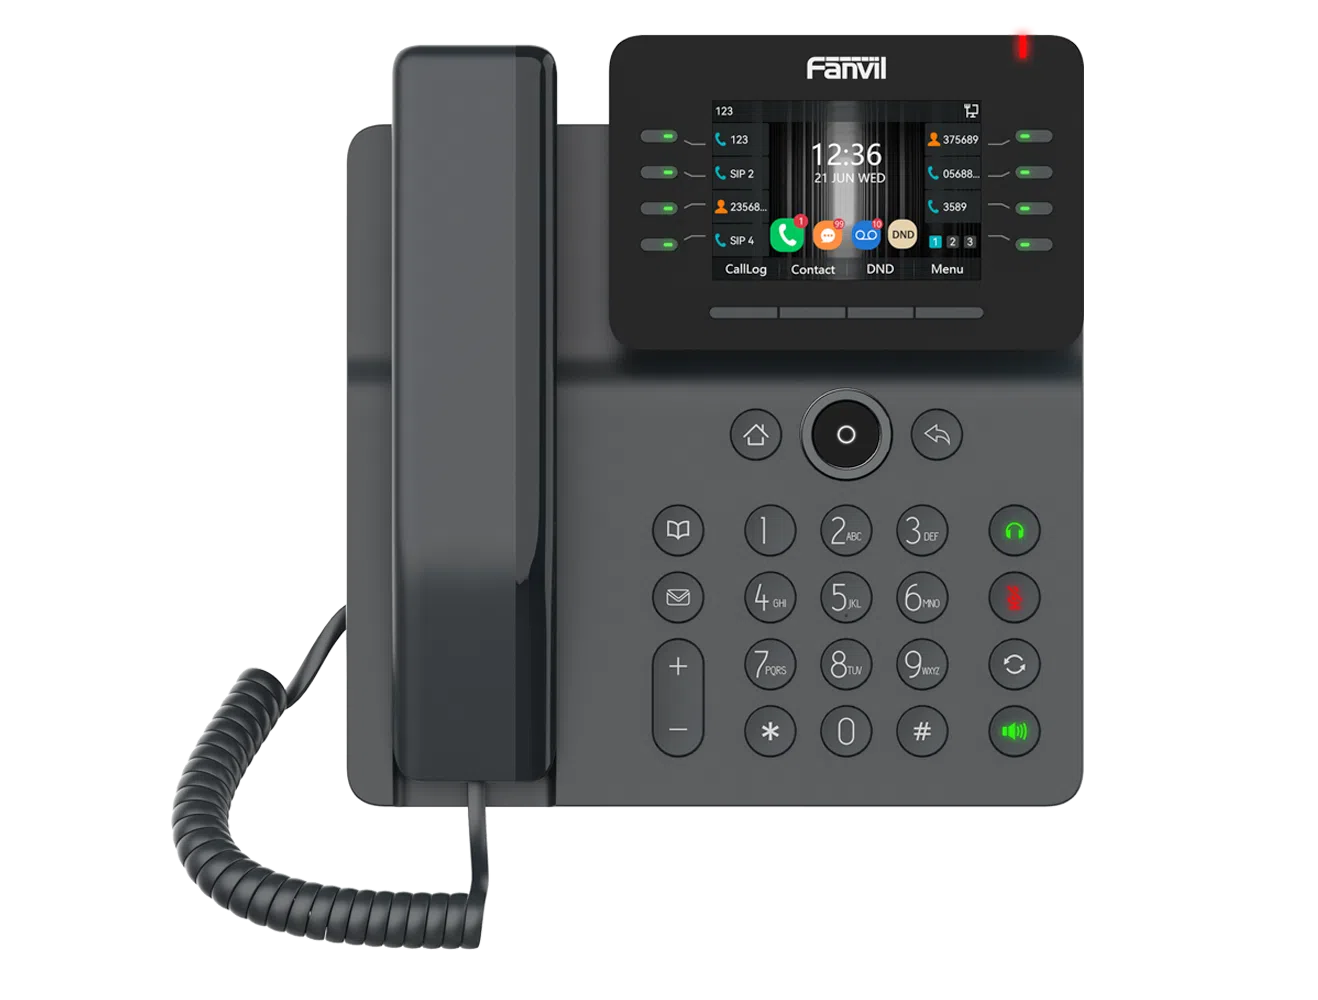 What is the maximum number of parties the Fanvil V64 Enterprise Phone can support in a local conference?